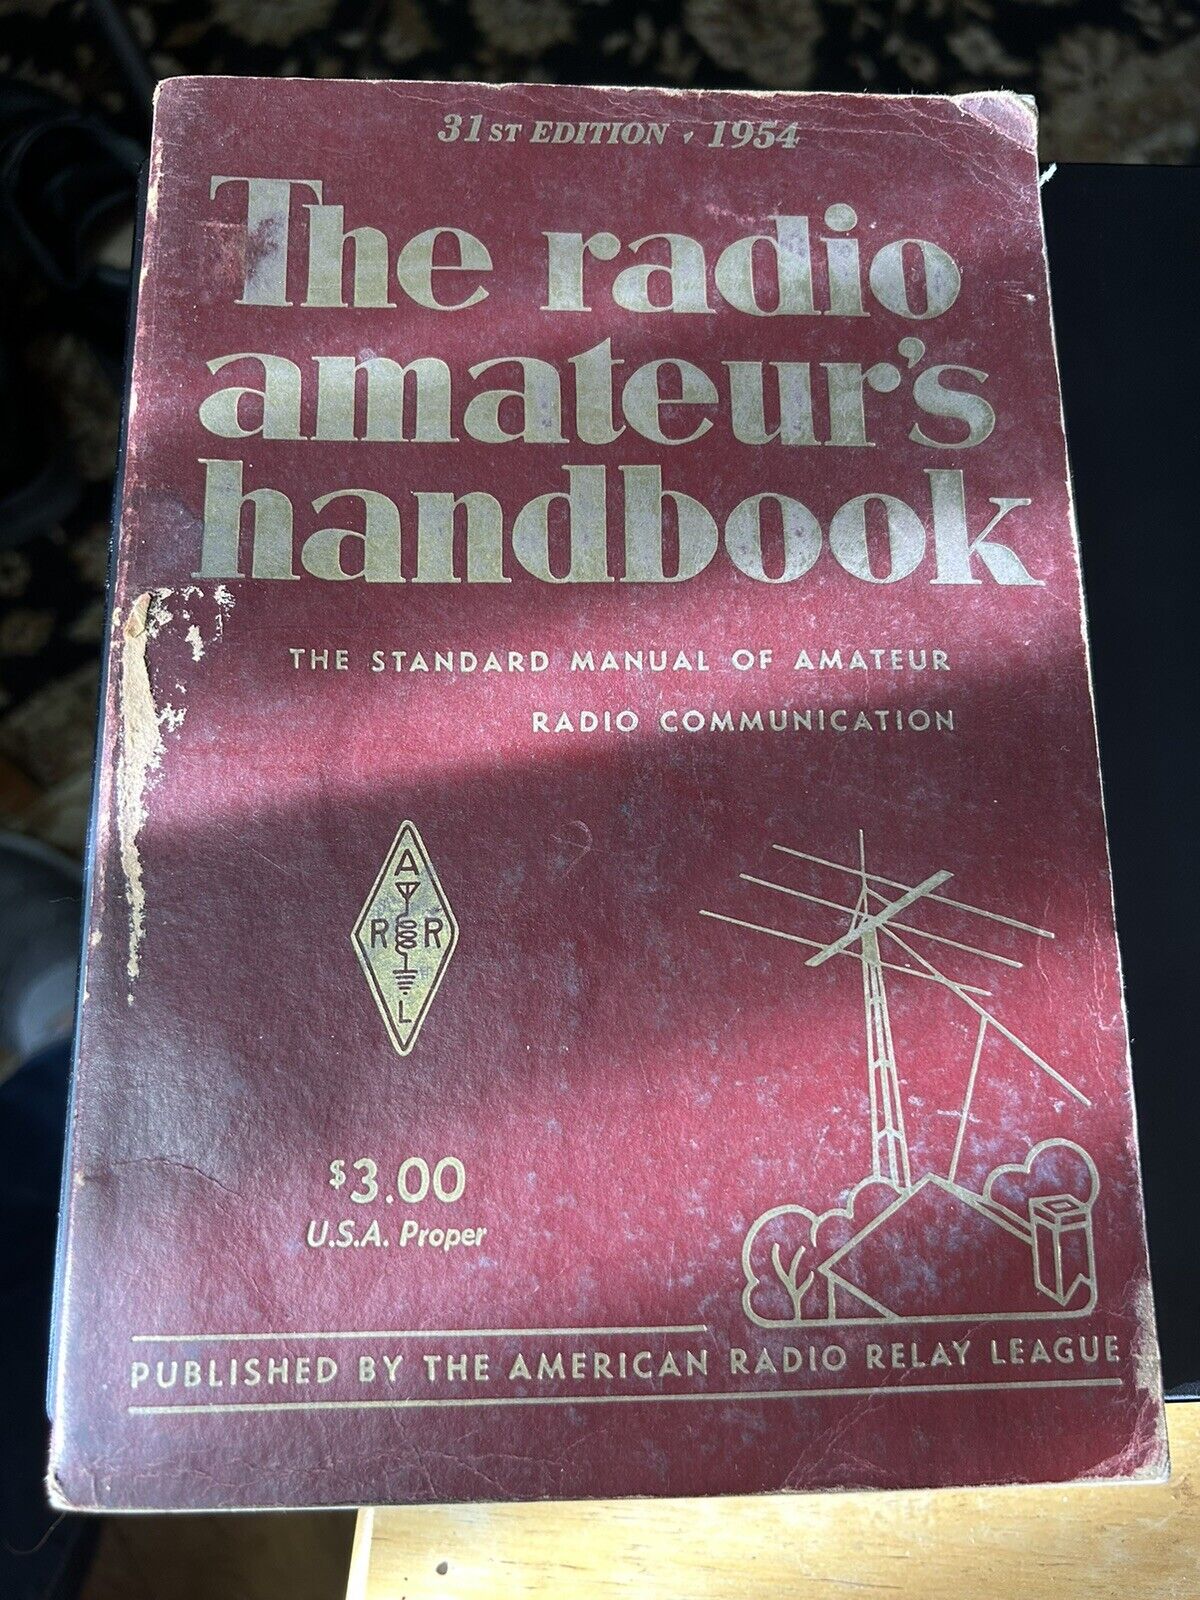 Softcover: The 1954 ARRL Handbook for the Radio Amateur